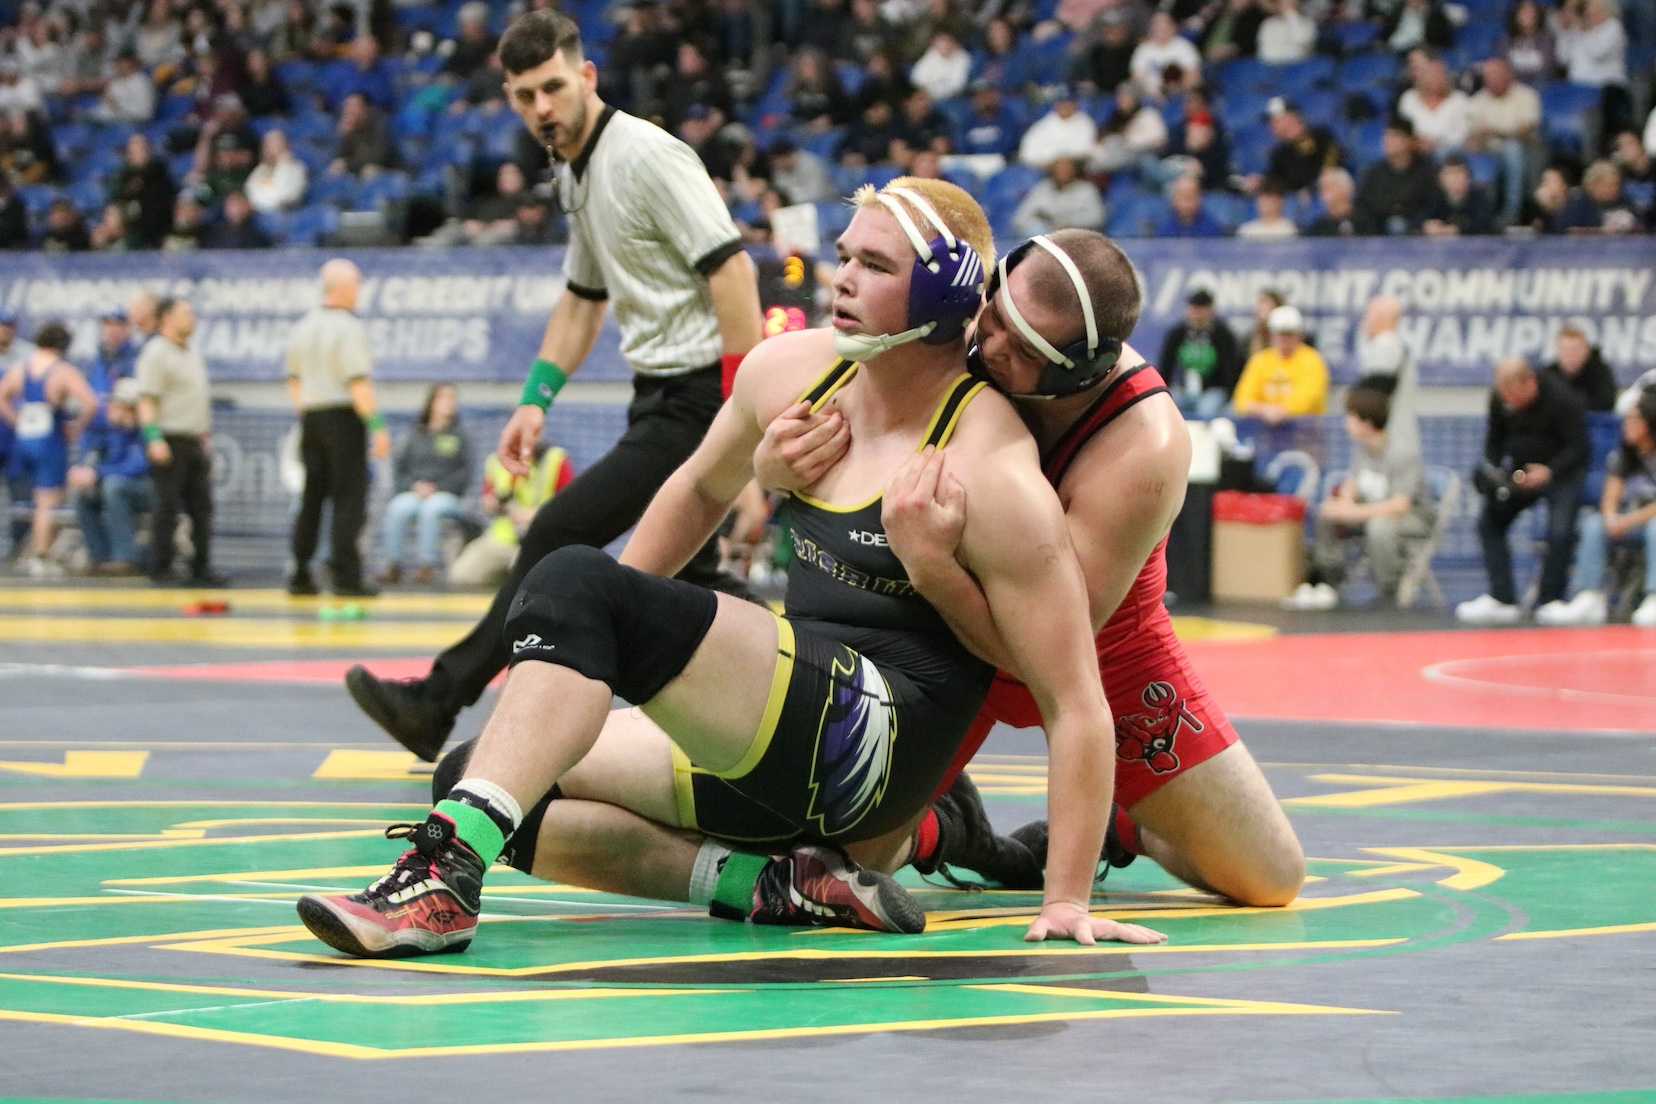 Harrisburg's Cooper Clark (left) won by a 4-3 decision over Coquille/Bandon's Tommy Vigue on Thursday. (Jim Beseda photo)